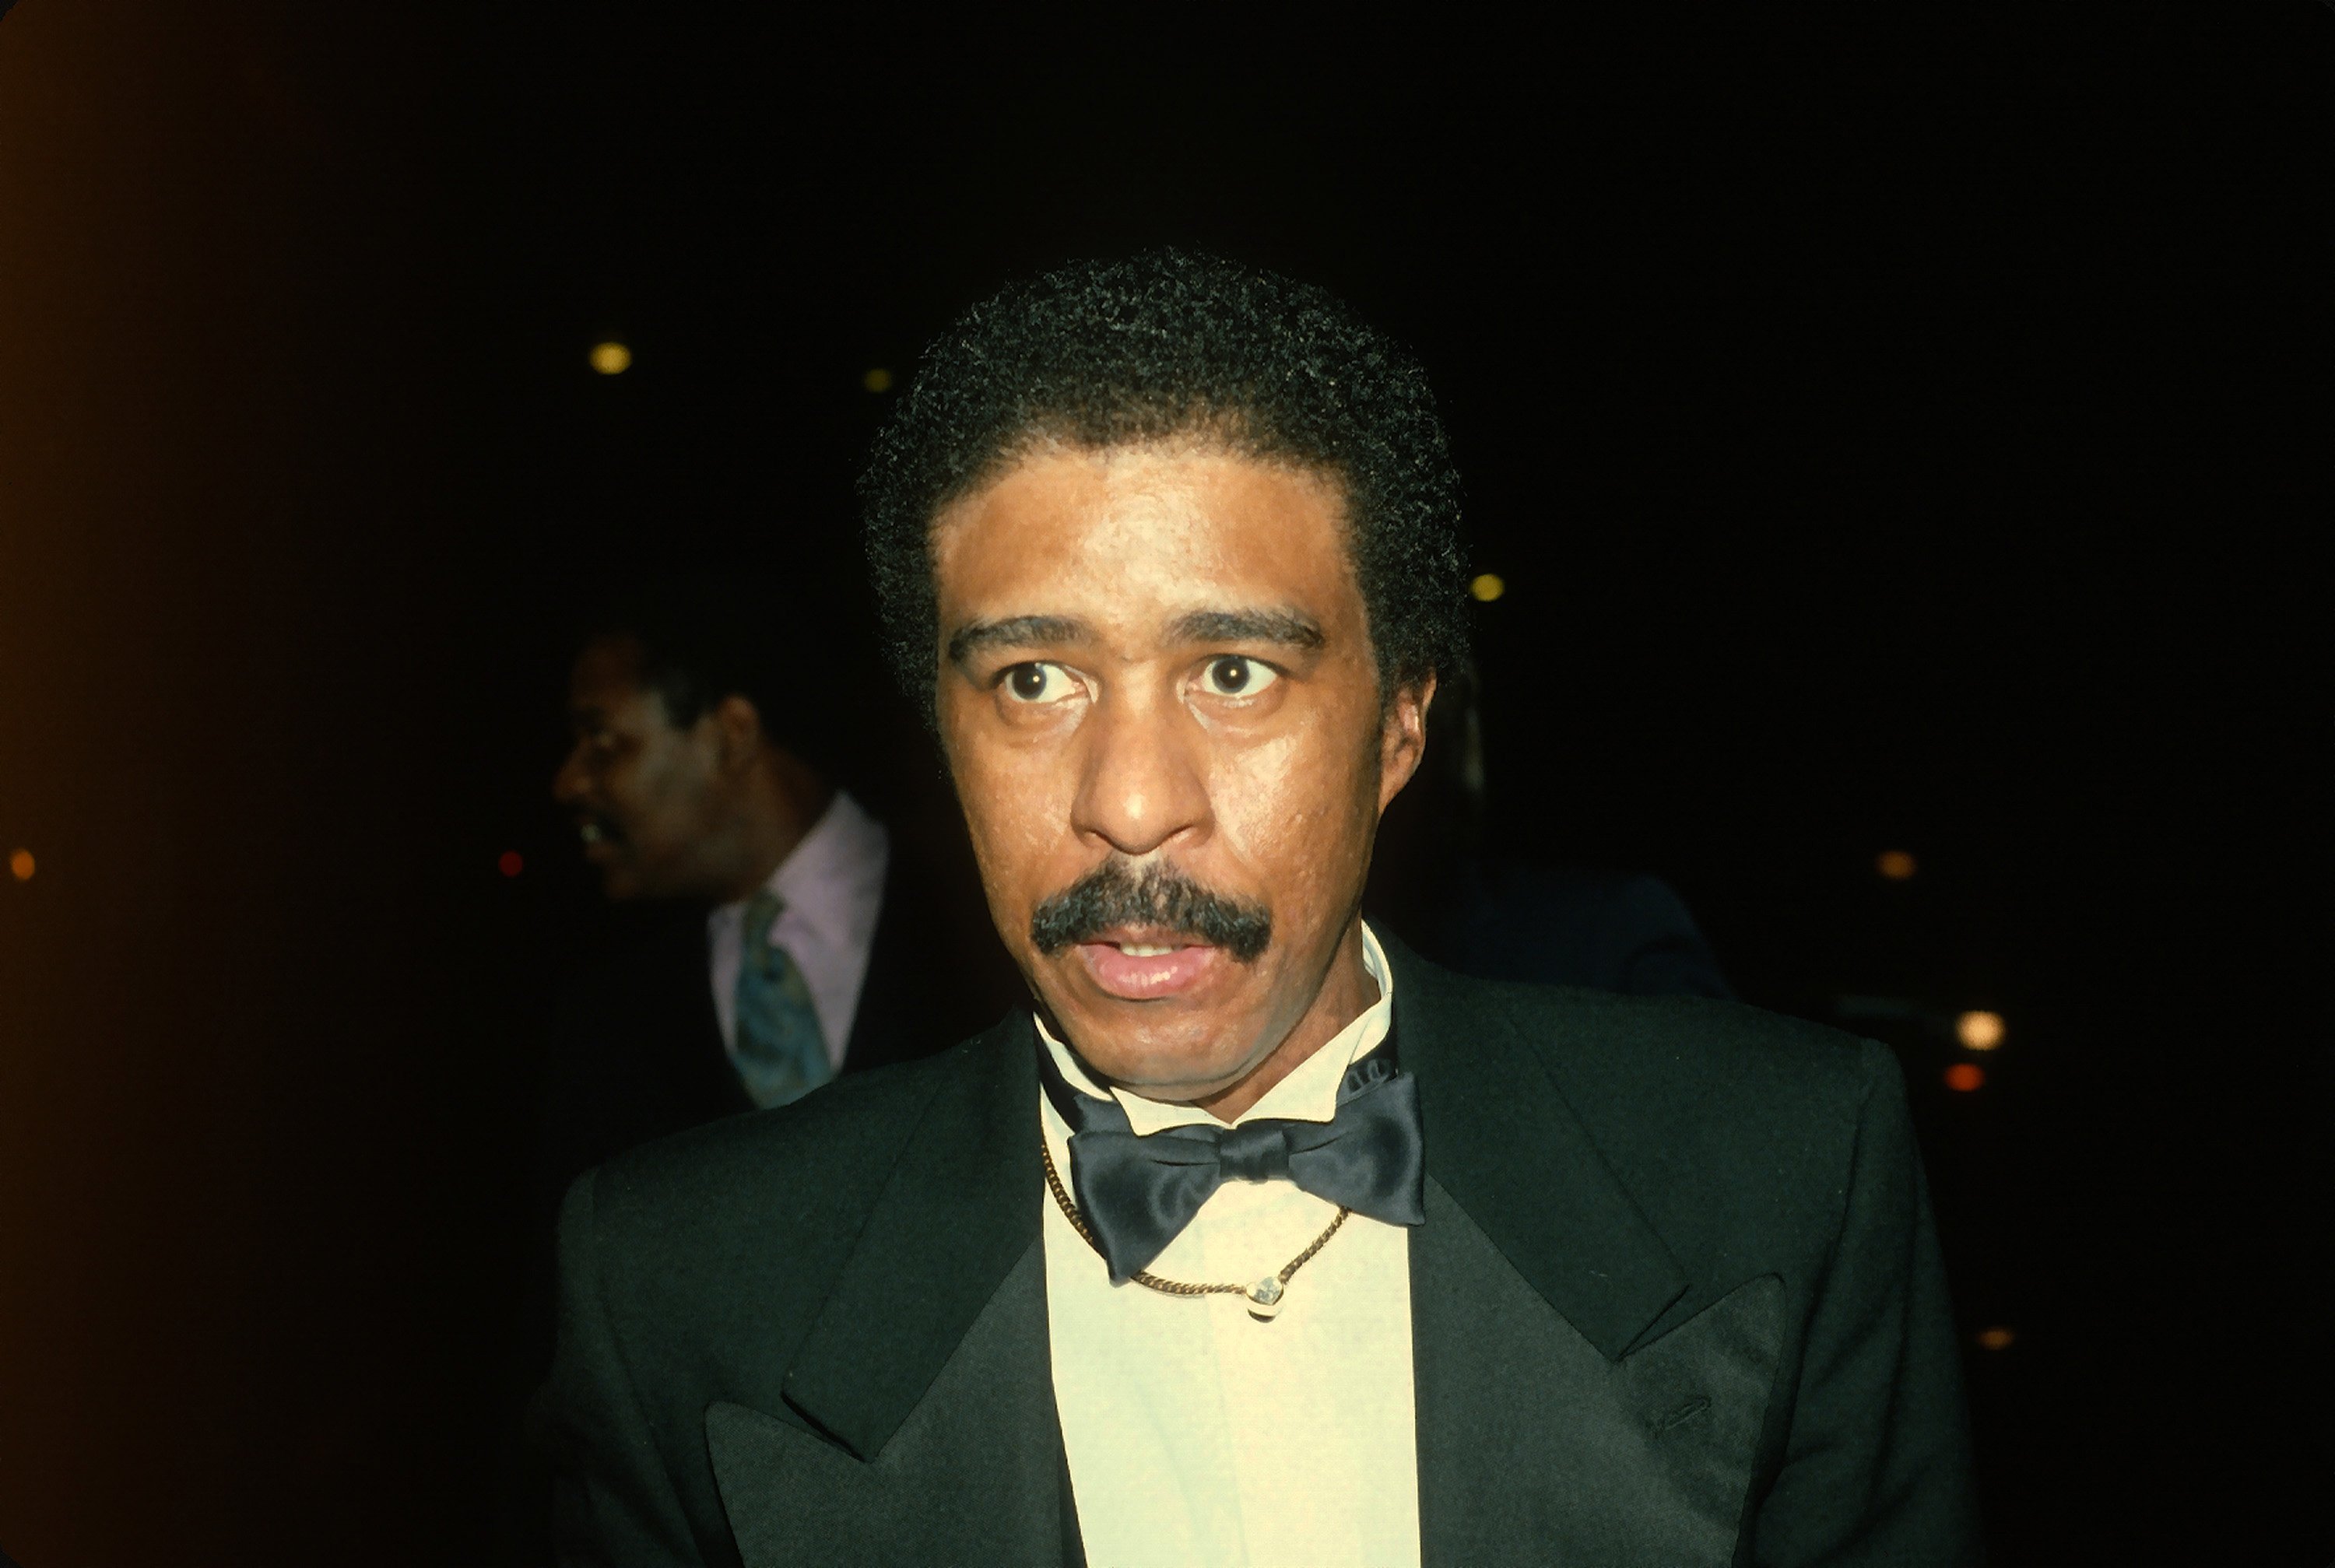 Richard Pryor at the  'Night of 100 Stars' event on March 8, 1982 in New York City. 